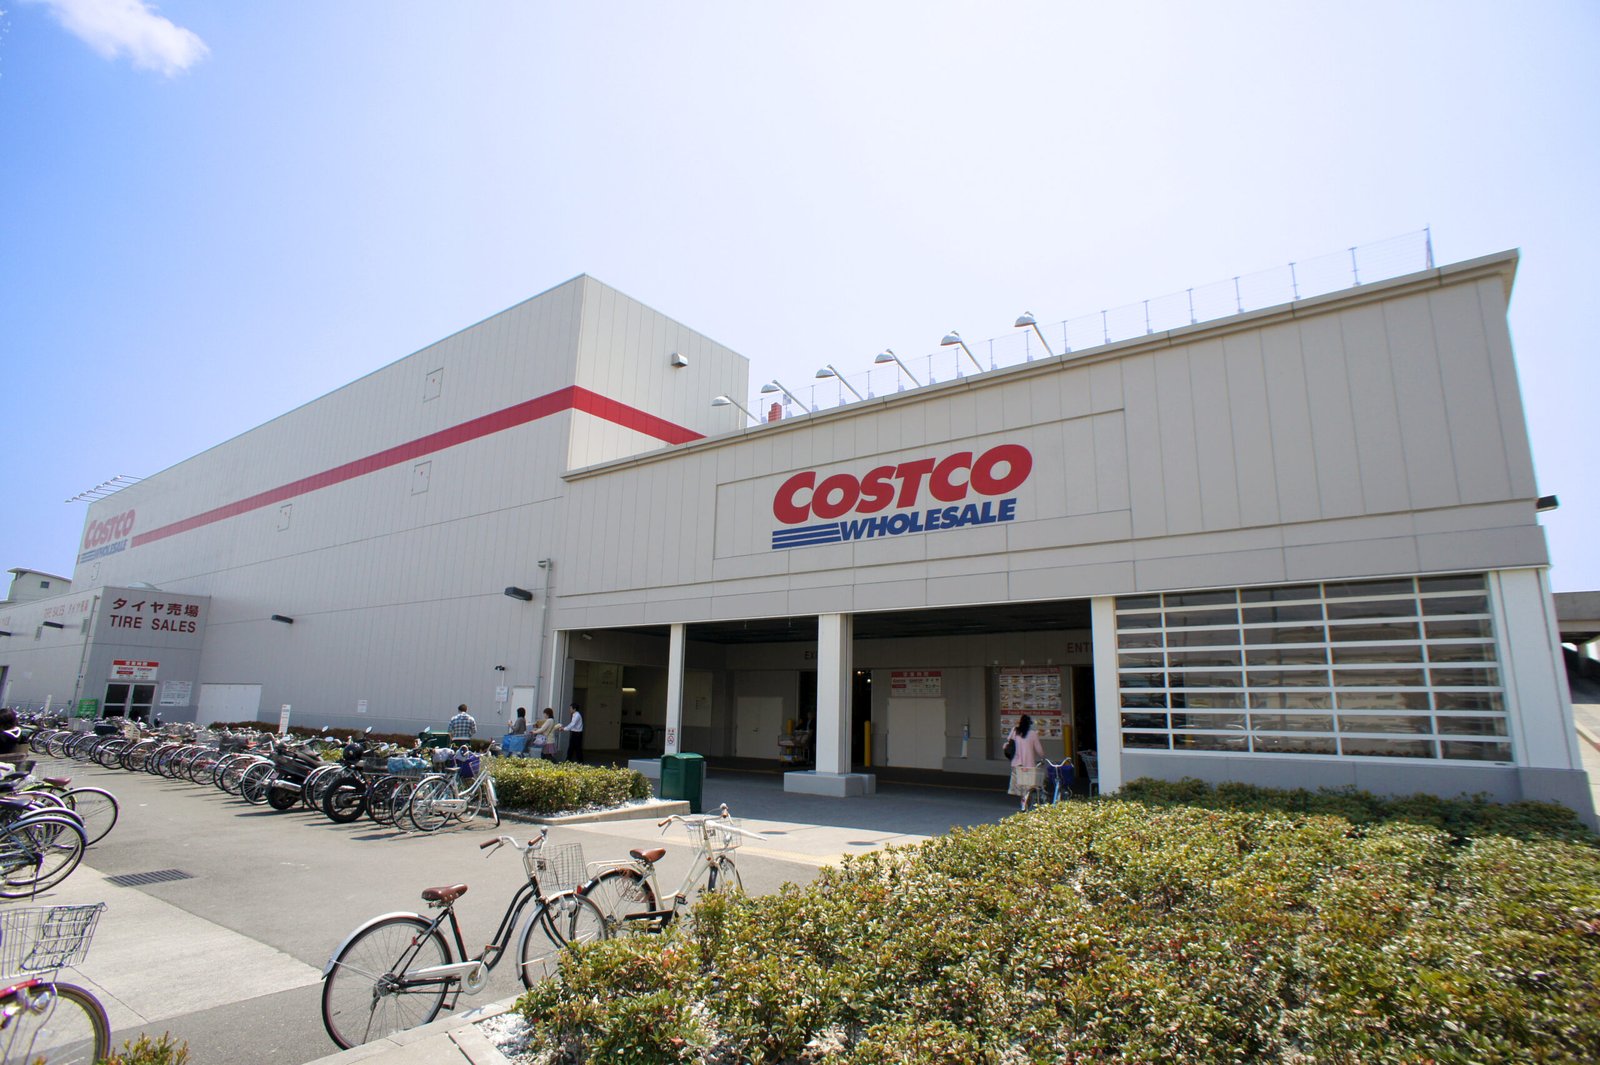 Does Costco Have Curbside Pickup